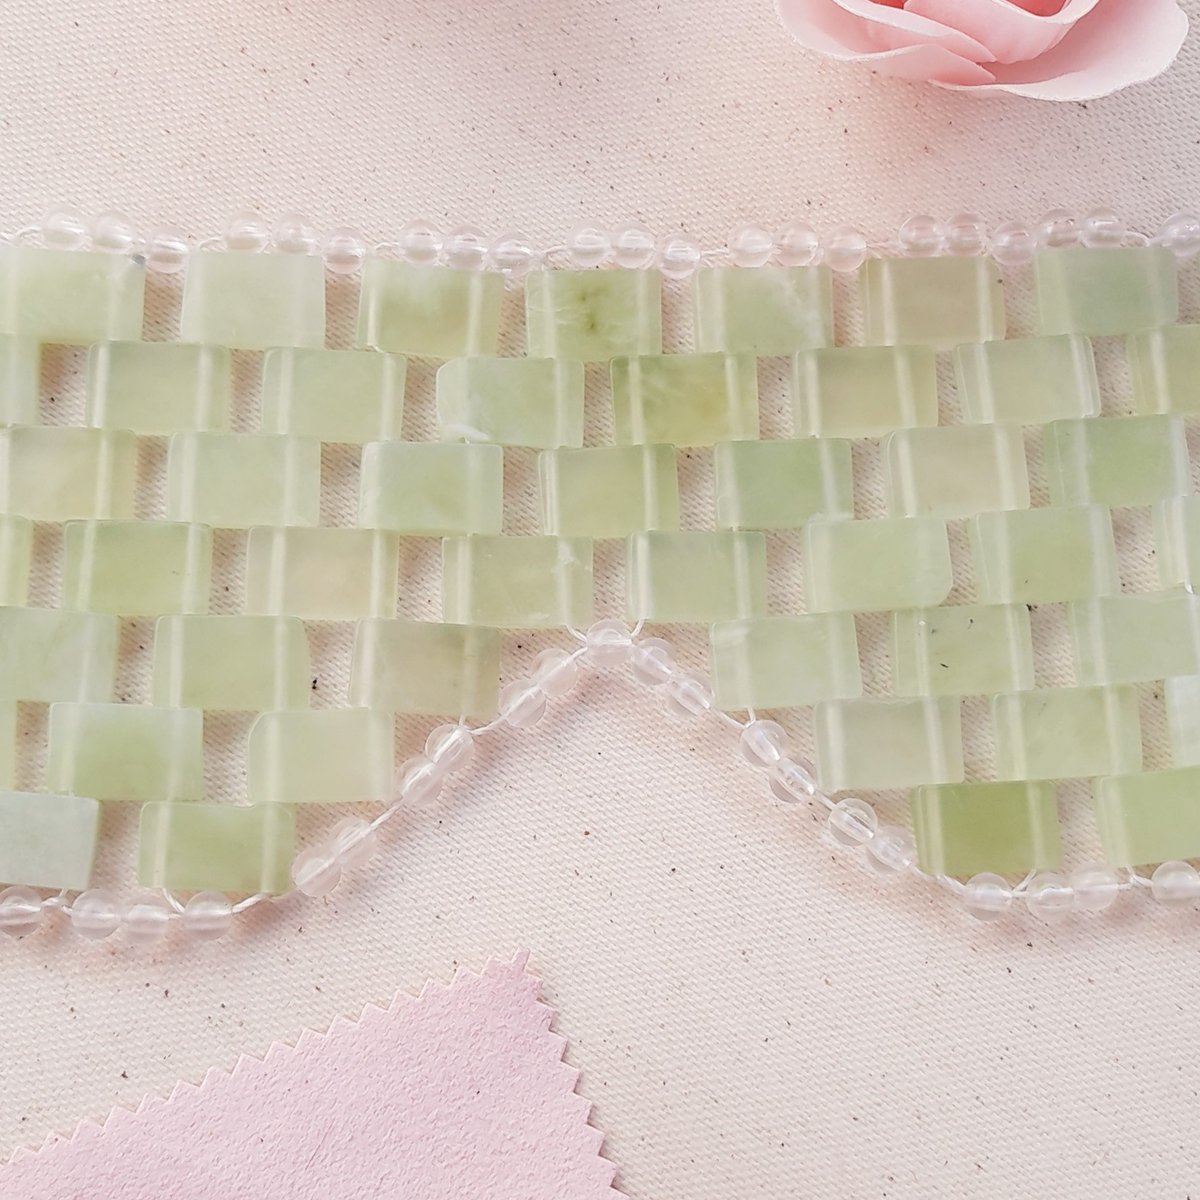 Seadbeady's Fashion and Lifestyle Blog: Revitalize Your Self-Care Routine with the BeReal Jade Eye Mask seadbeady.blogspot.com/2023/06/revita… #Lifestyle @LifestyleBlogzz #TeamBlogger @BloggersHut #BloggersHutRT #Blogger #Fashion #BBlogRT #Beauty